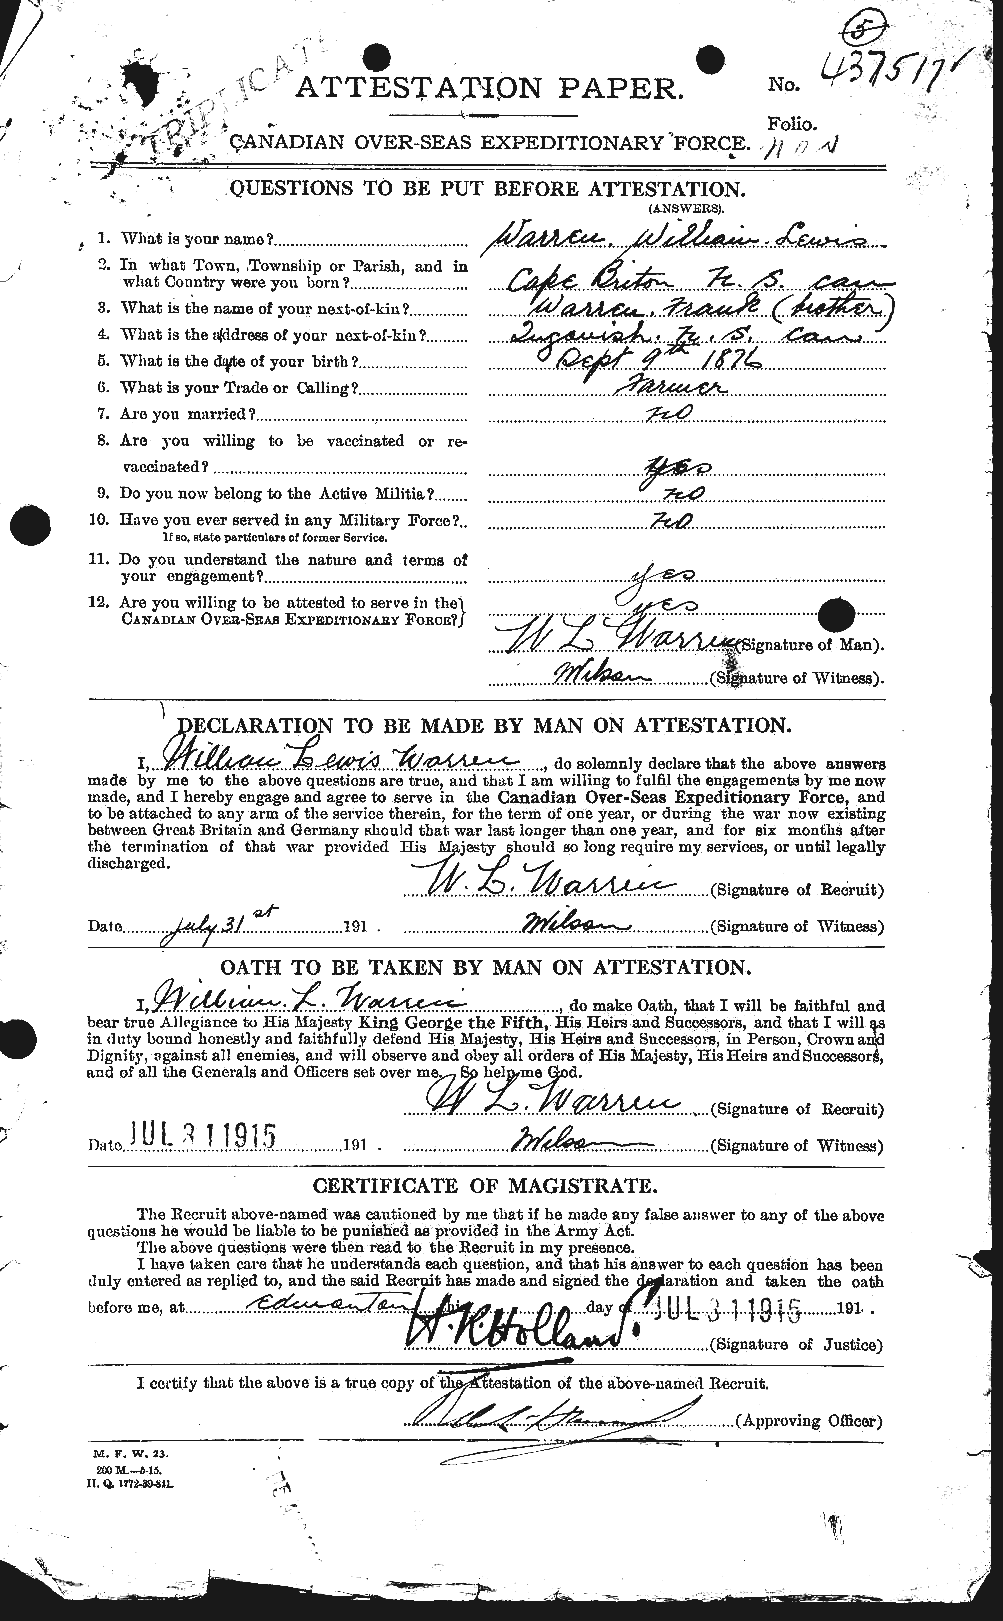 Personnel Records of the First World War - CEF 658692a